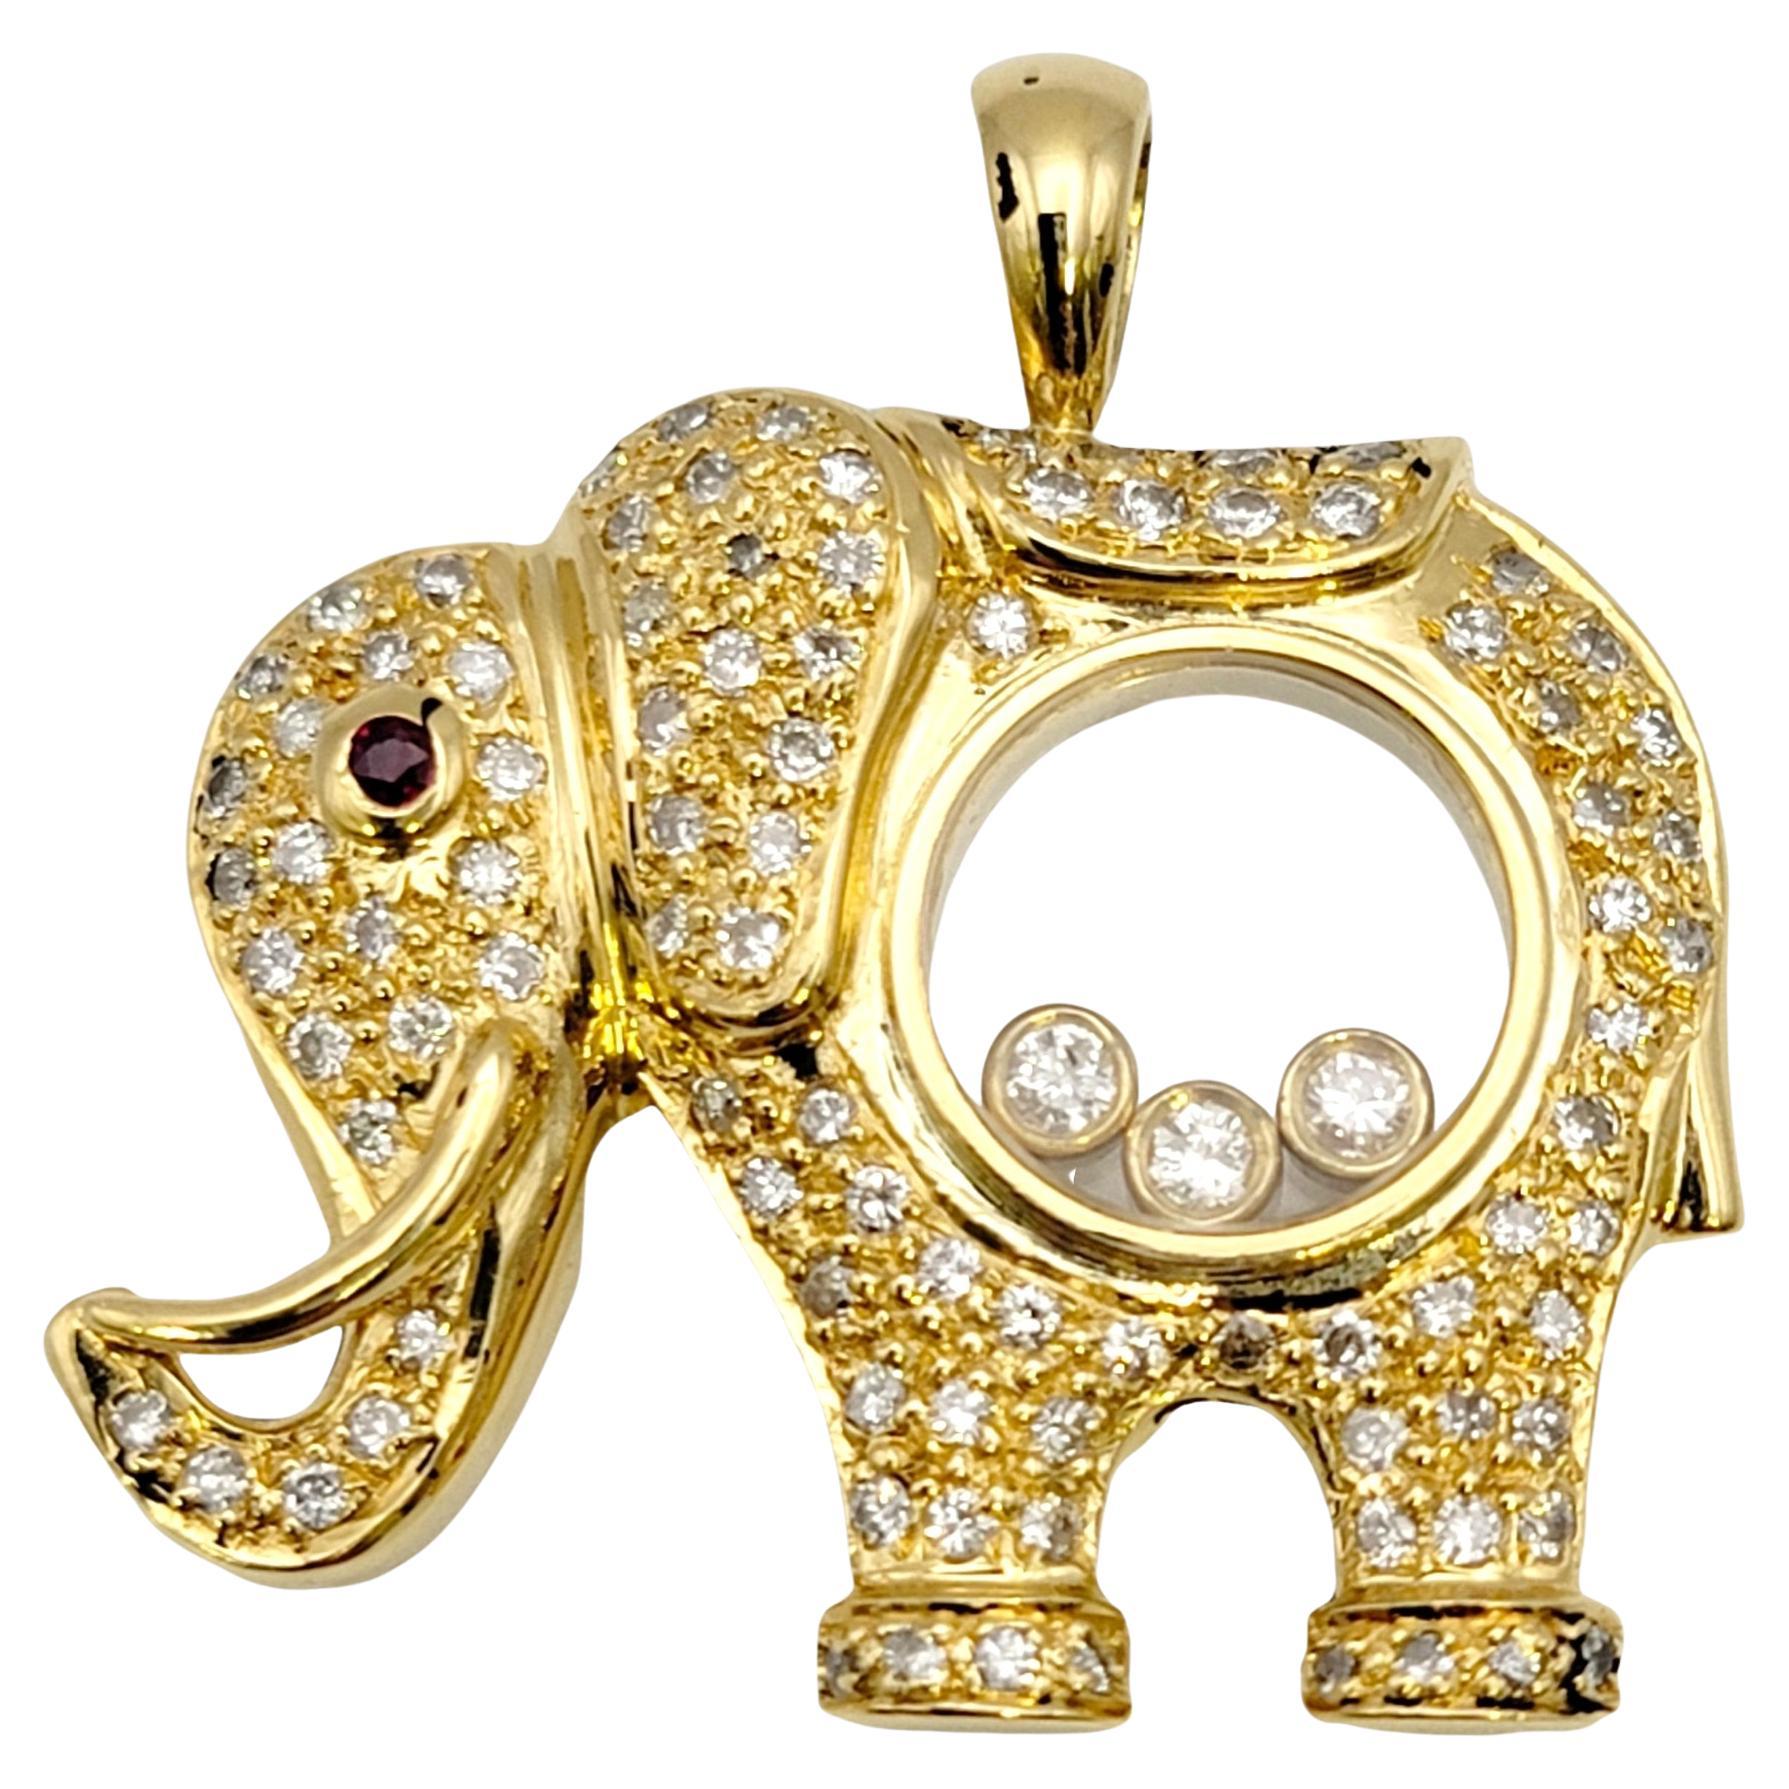 Floating Diamond and Pave Elephant Pendant with Ruby Eye in 18 Karat Yellow Gold